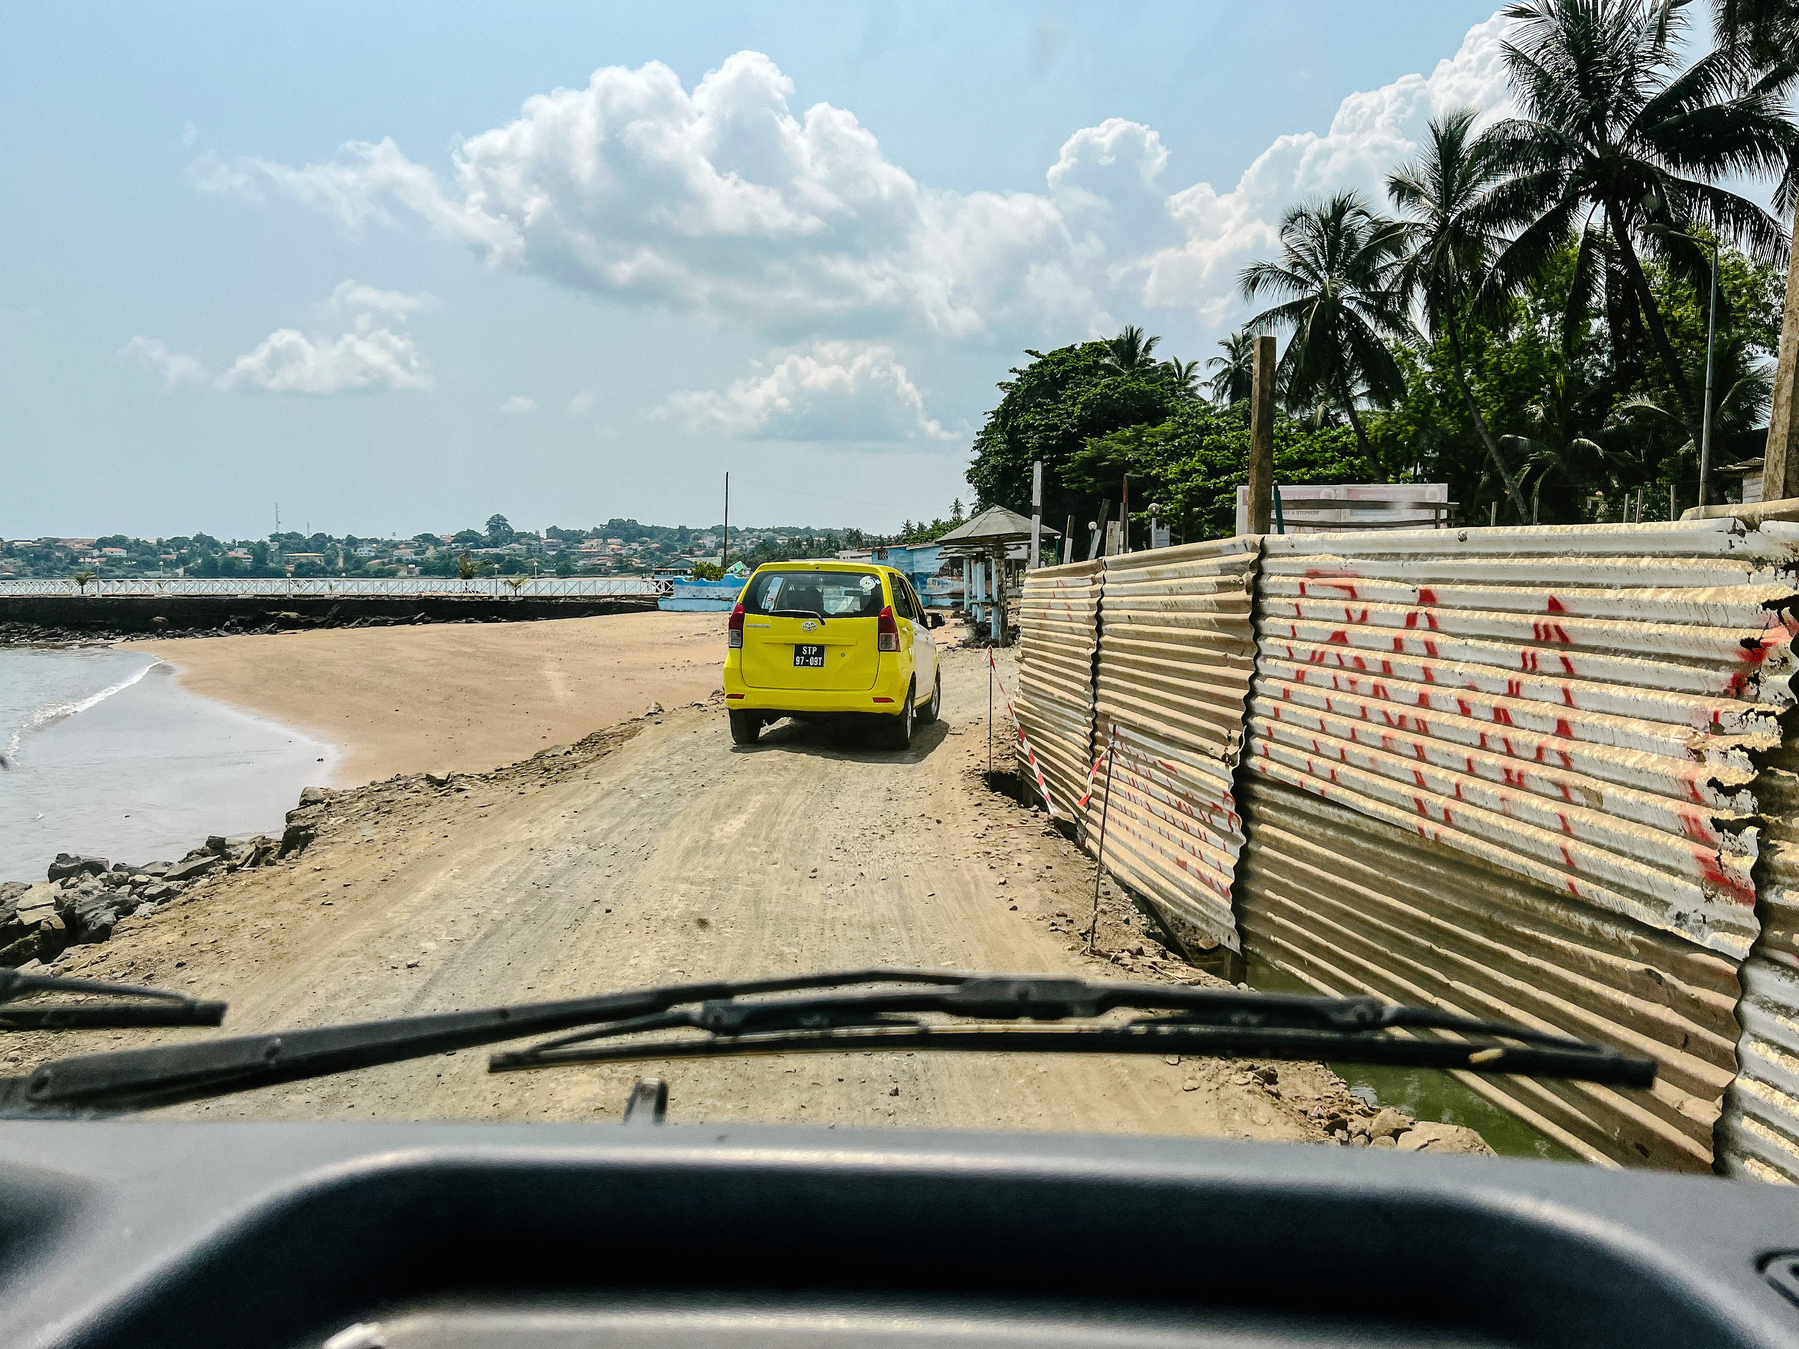 Seen from inside a car, we’re following a yellow car on a dirt road. The sea is on the left side. 